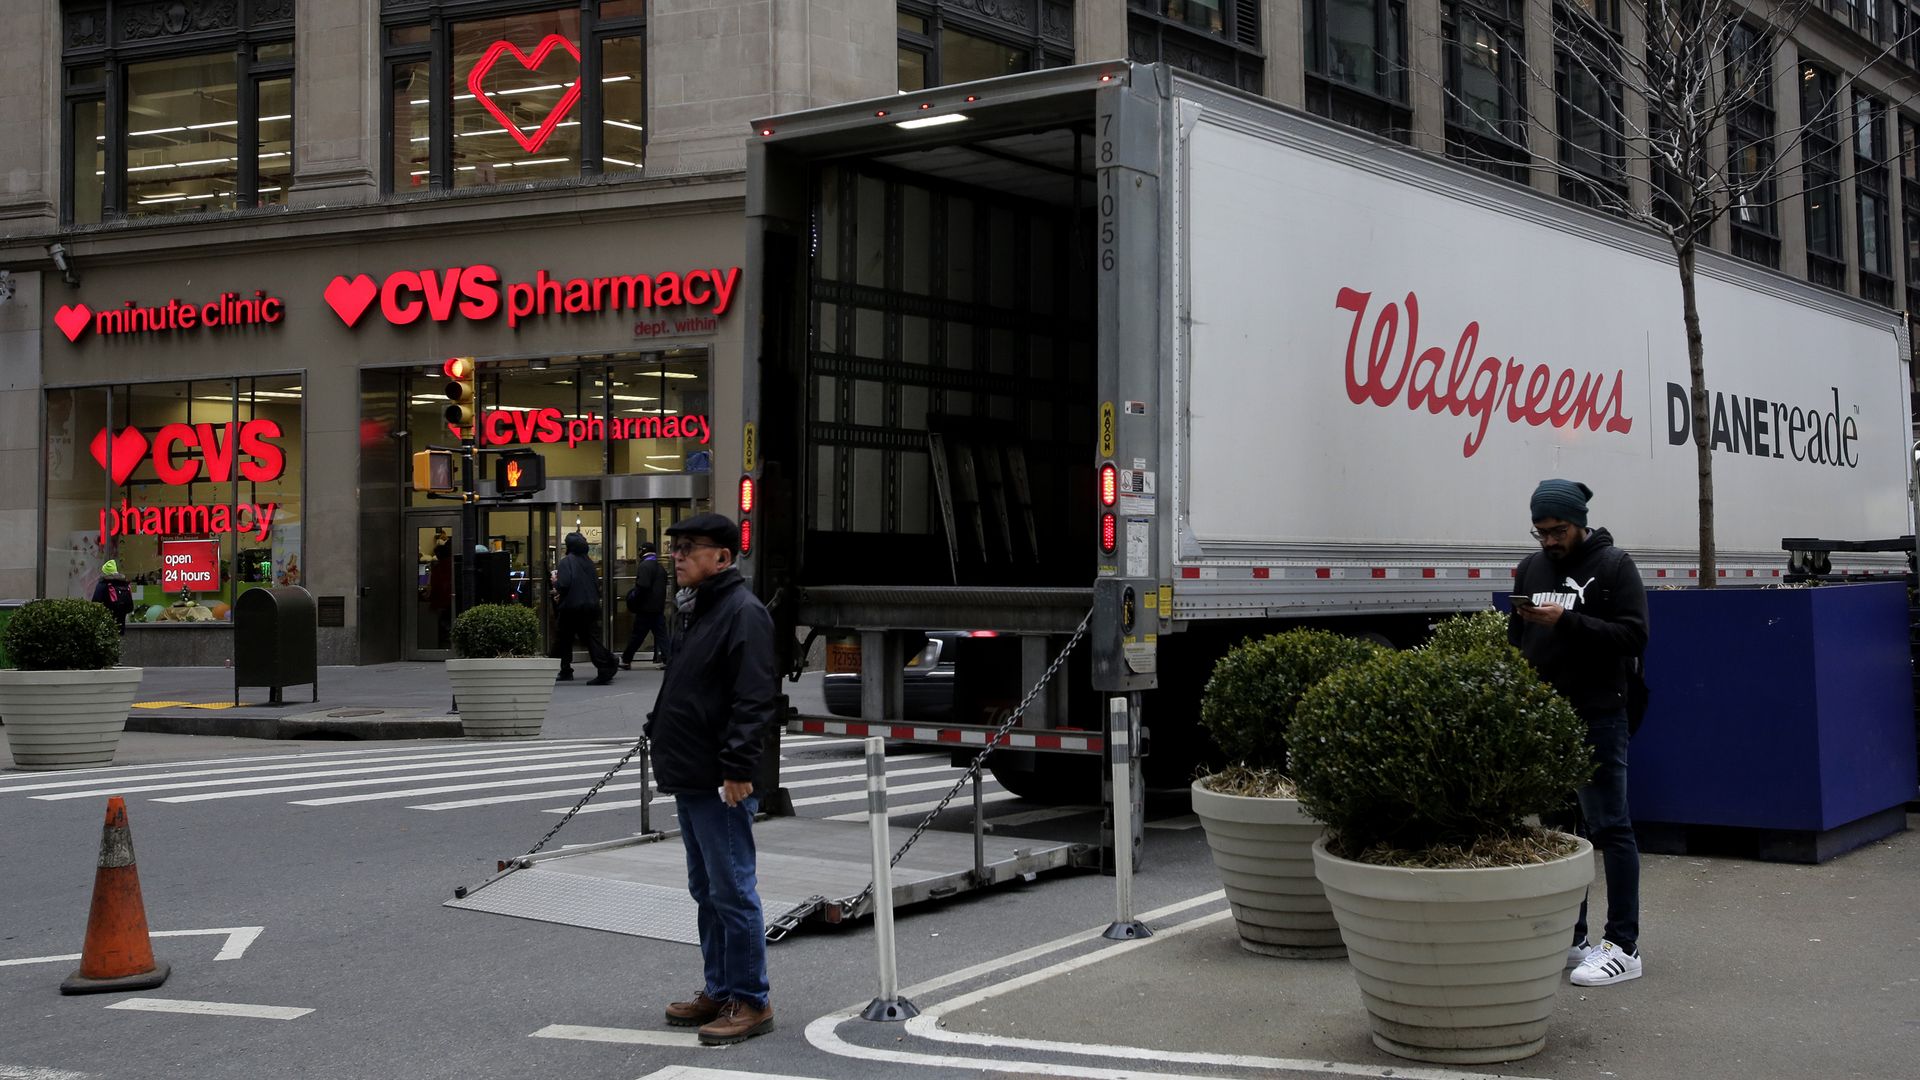 A Walgreens truck parks near a CVS Pharmacy on March 10, 2023 in New York City. New York Governor Kathy Hochul and state Attorney General Letitia James called on the biggest pharmacy chains to commit to making abortion pills available in the state. (Photo by Leonardo Munoz/VIEWpress)